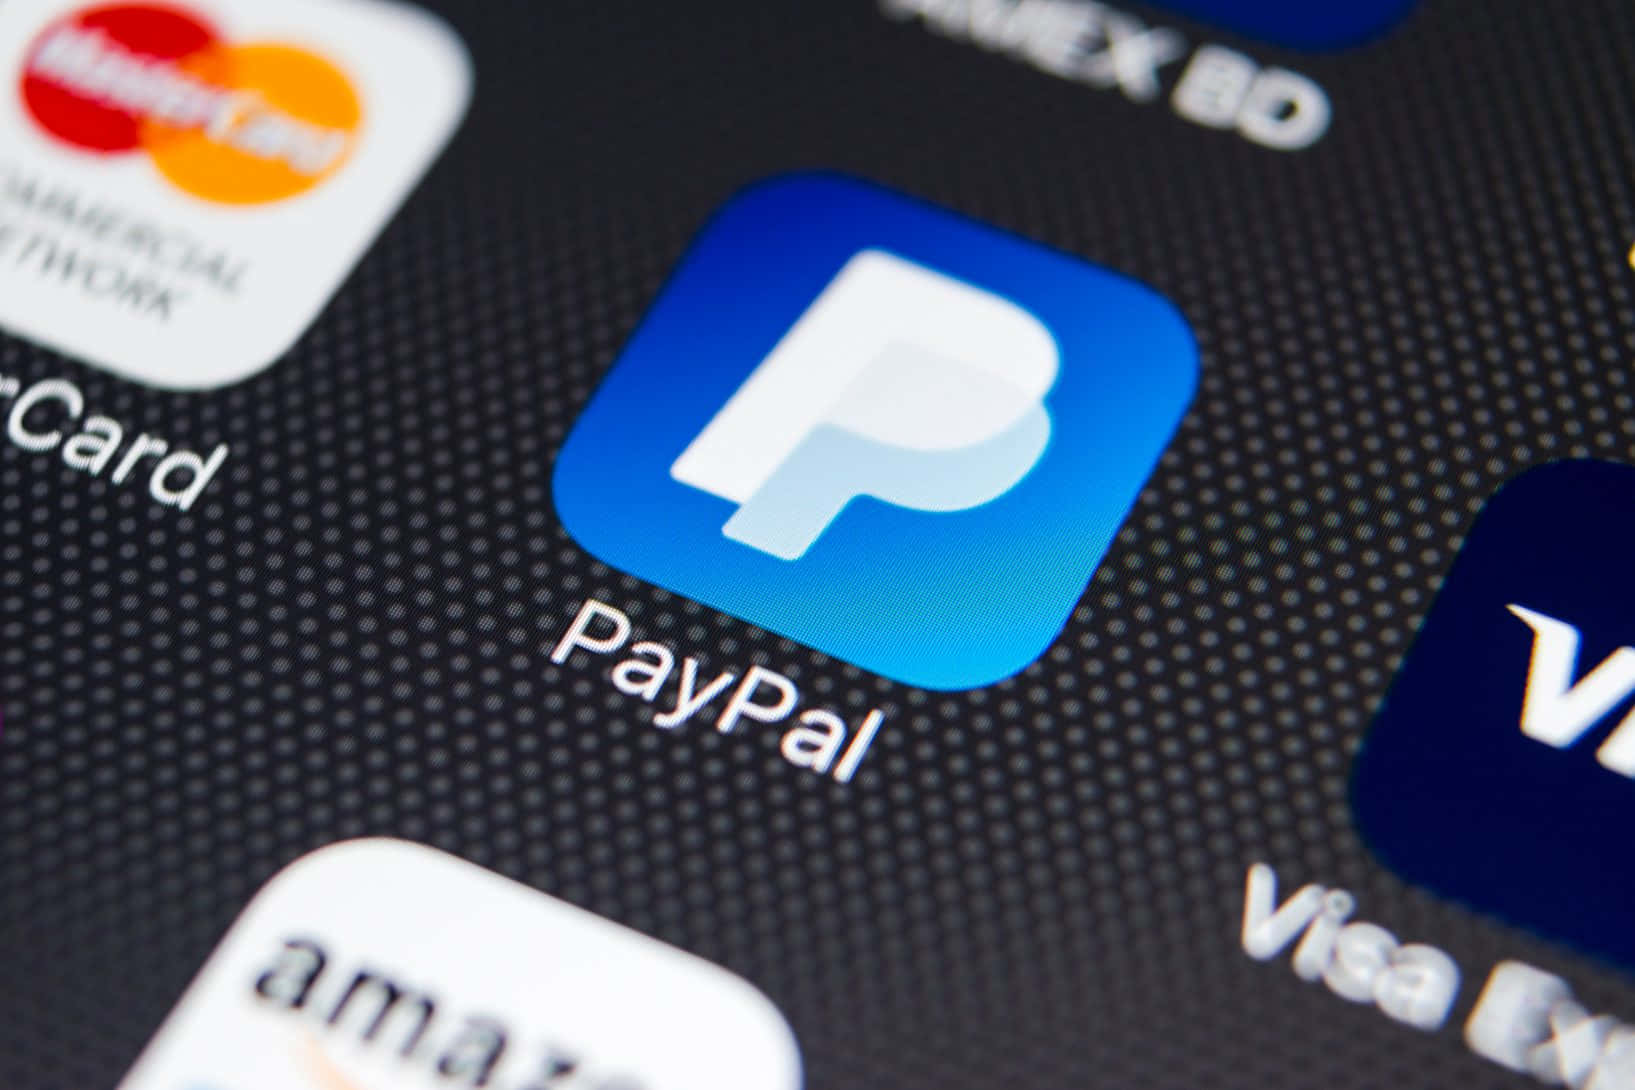 Join the millions of businesses around the world who accept payments with PayPal